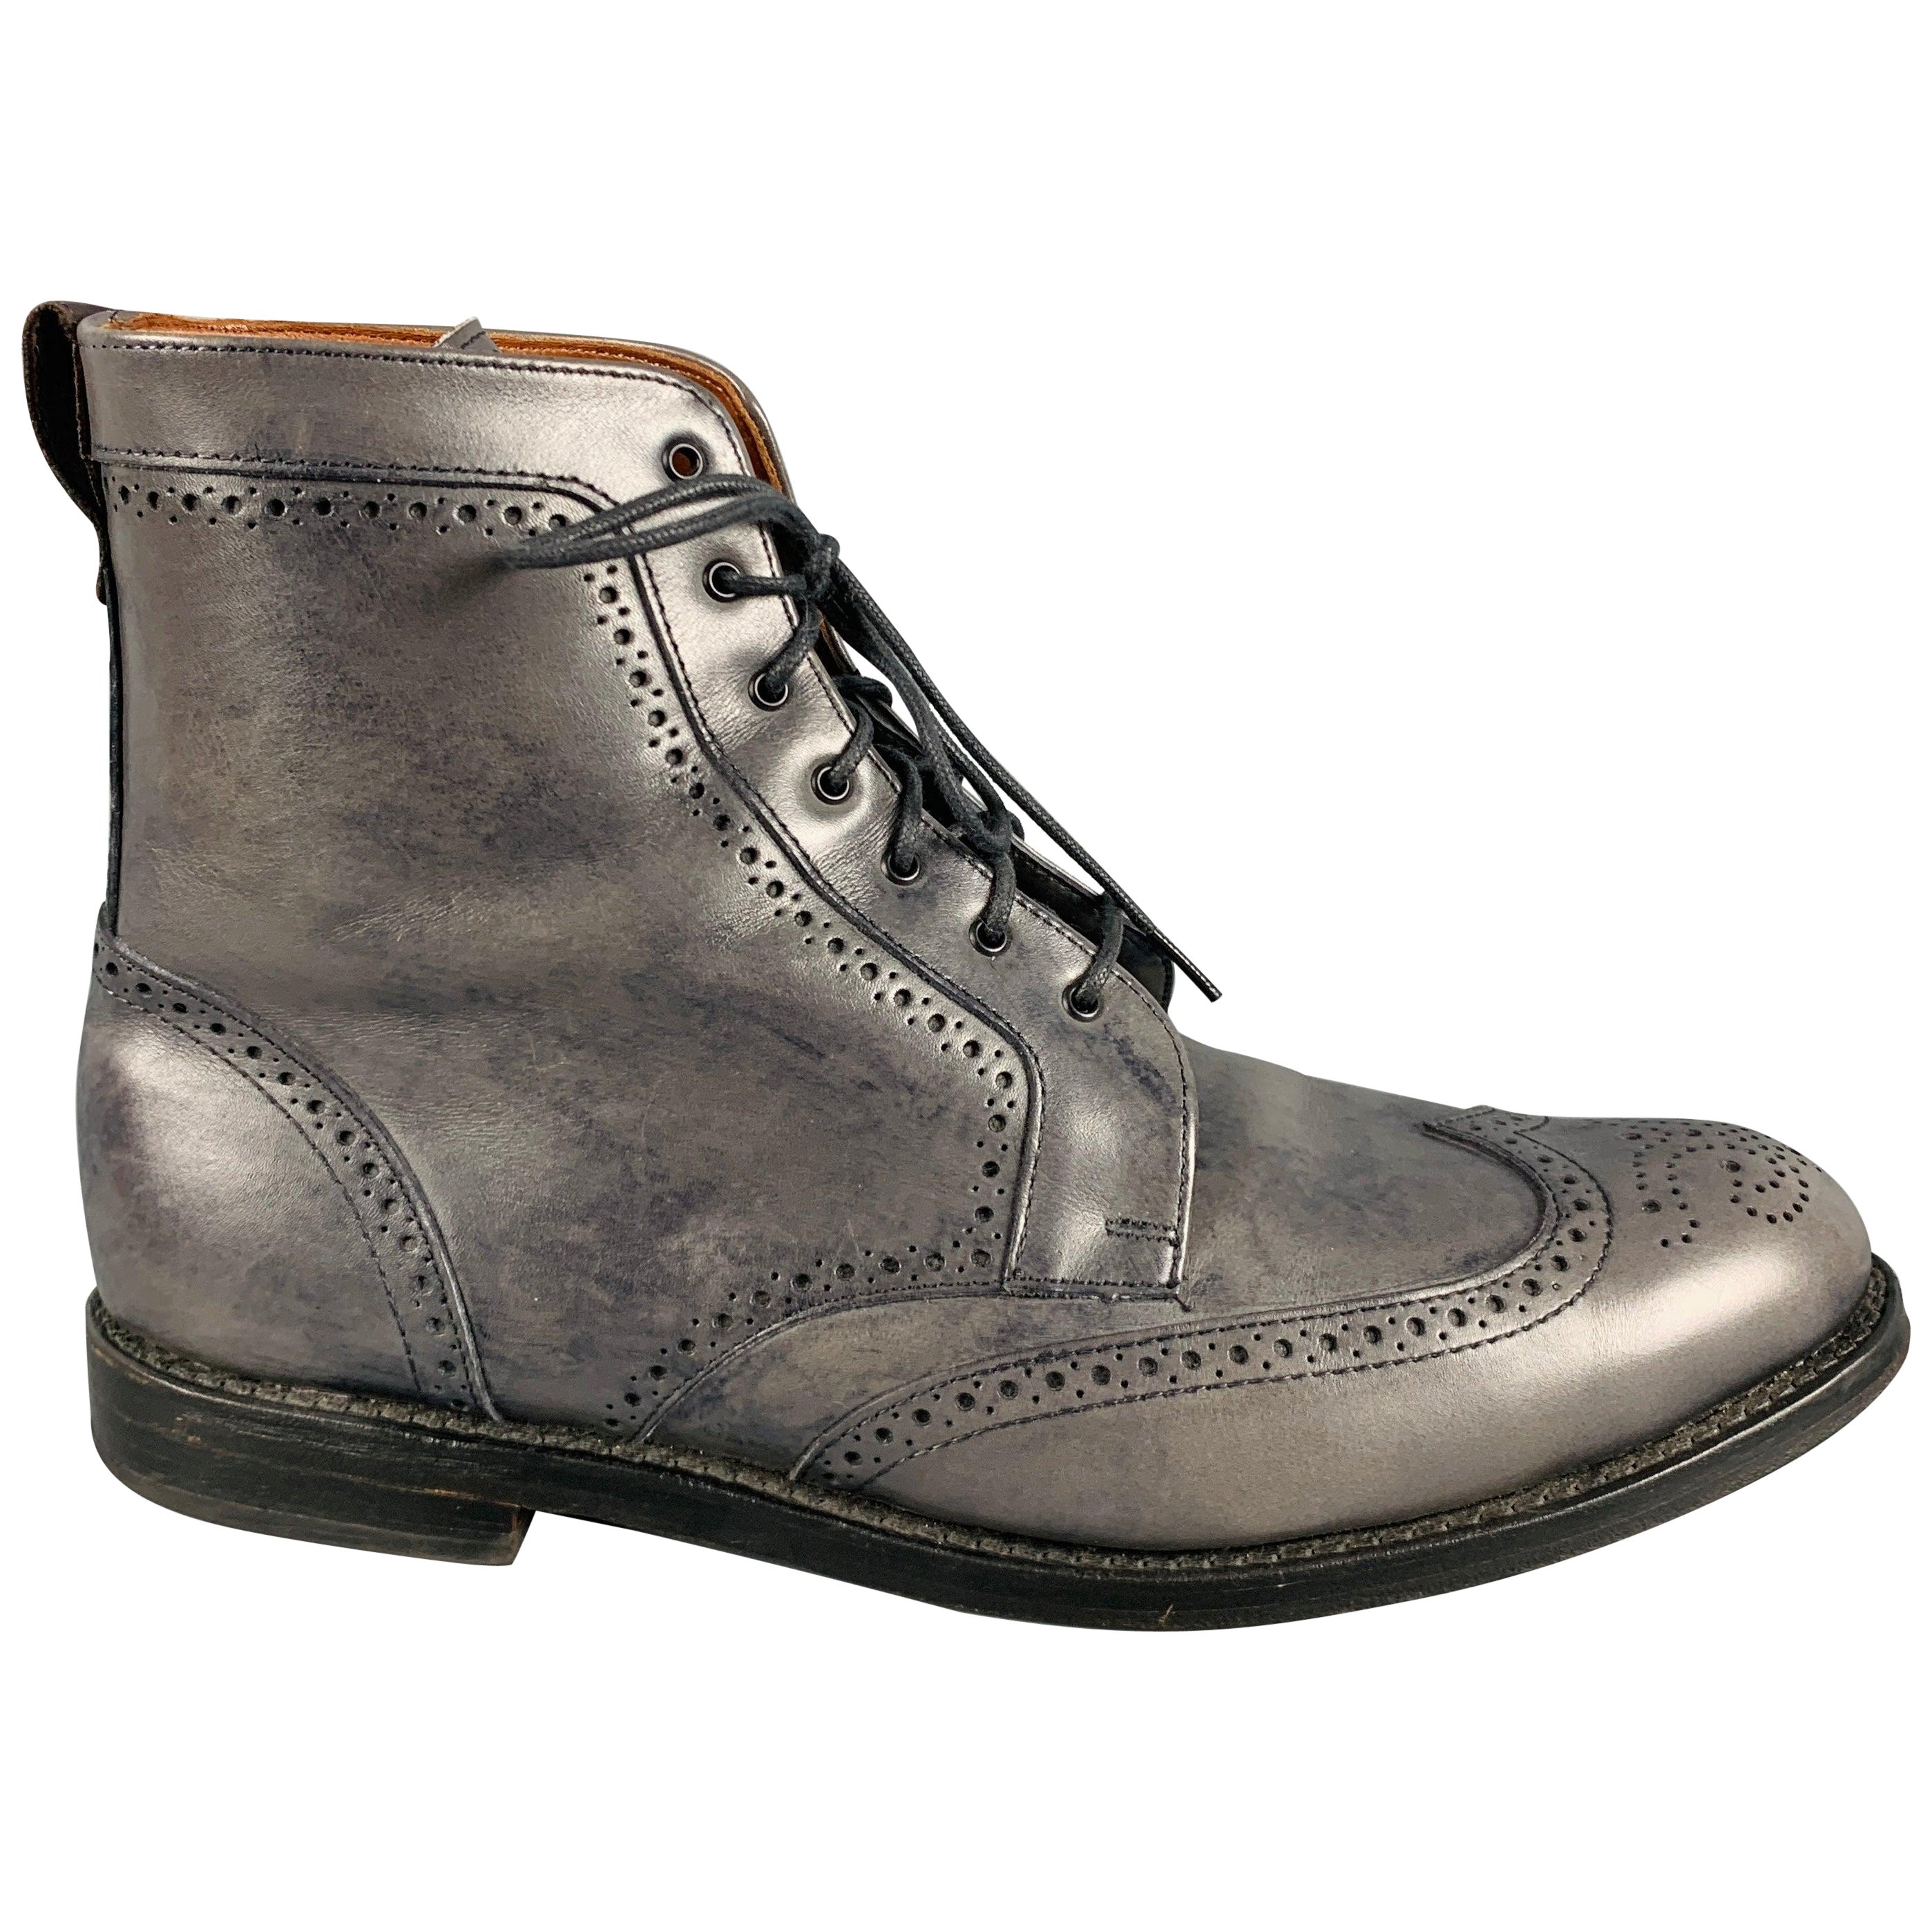 ALLEN EDMONDS Size 13 Grey Perforated Leather Wingtip Boots For Sale